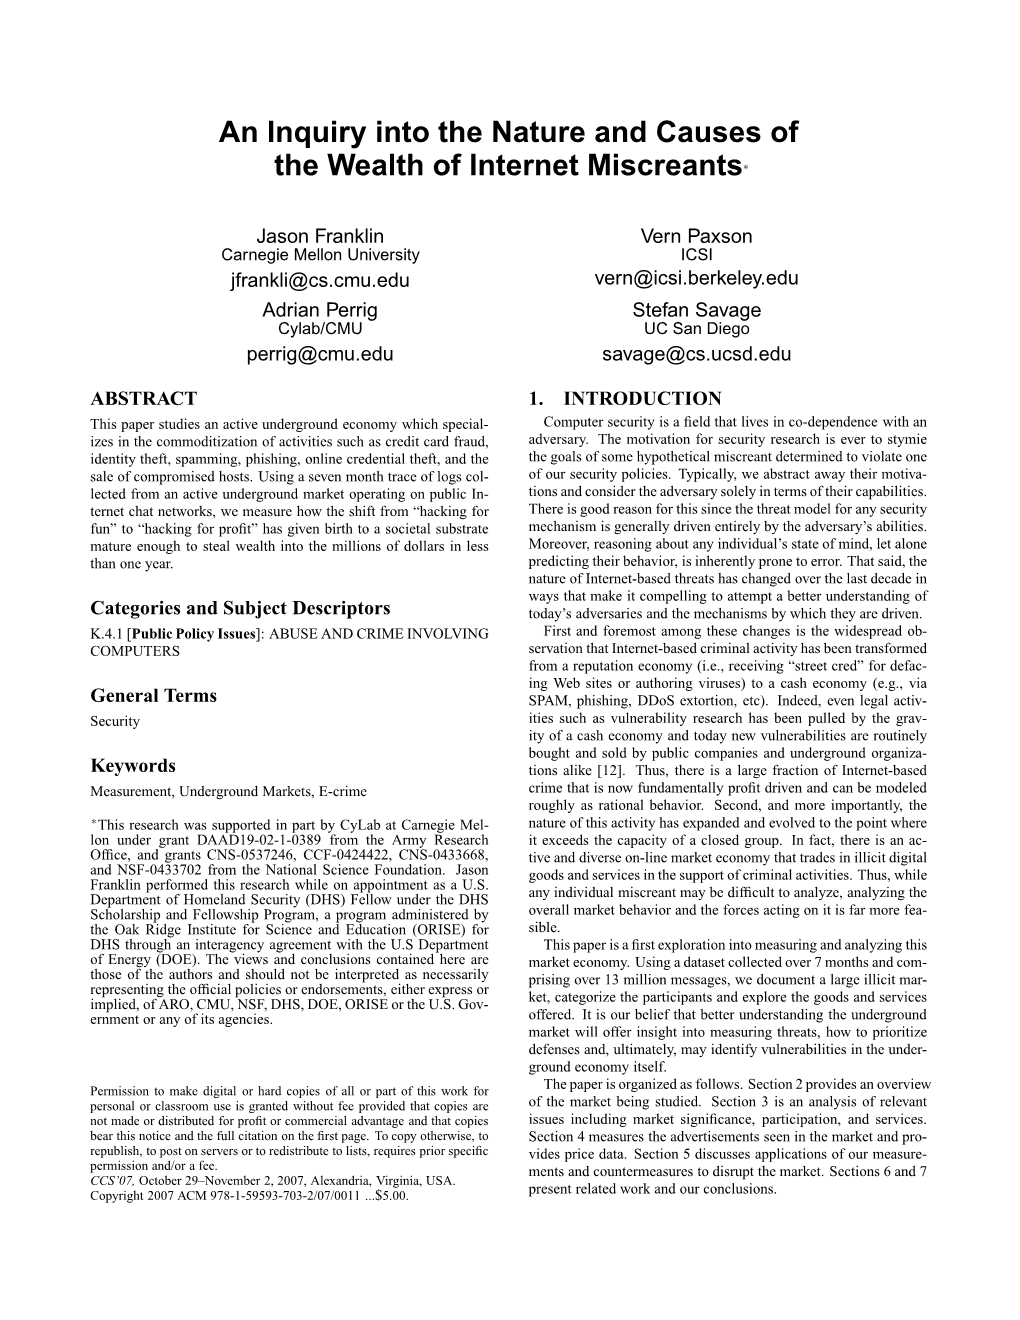 An Inquiry Into the Nature and Causes of the Wealth of Internet Miscreants∗